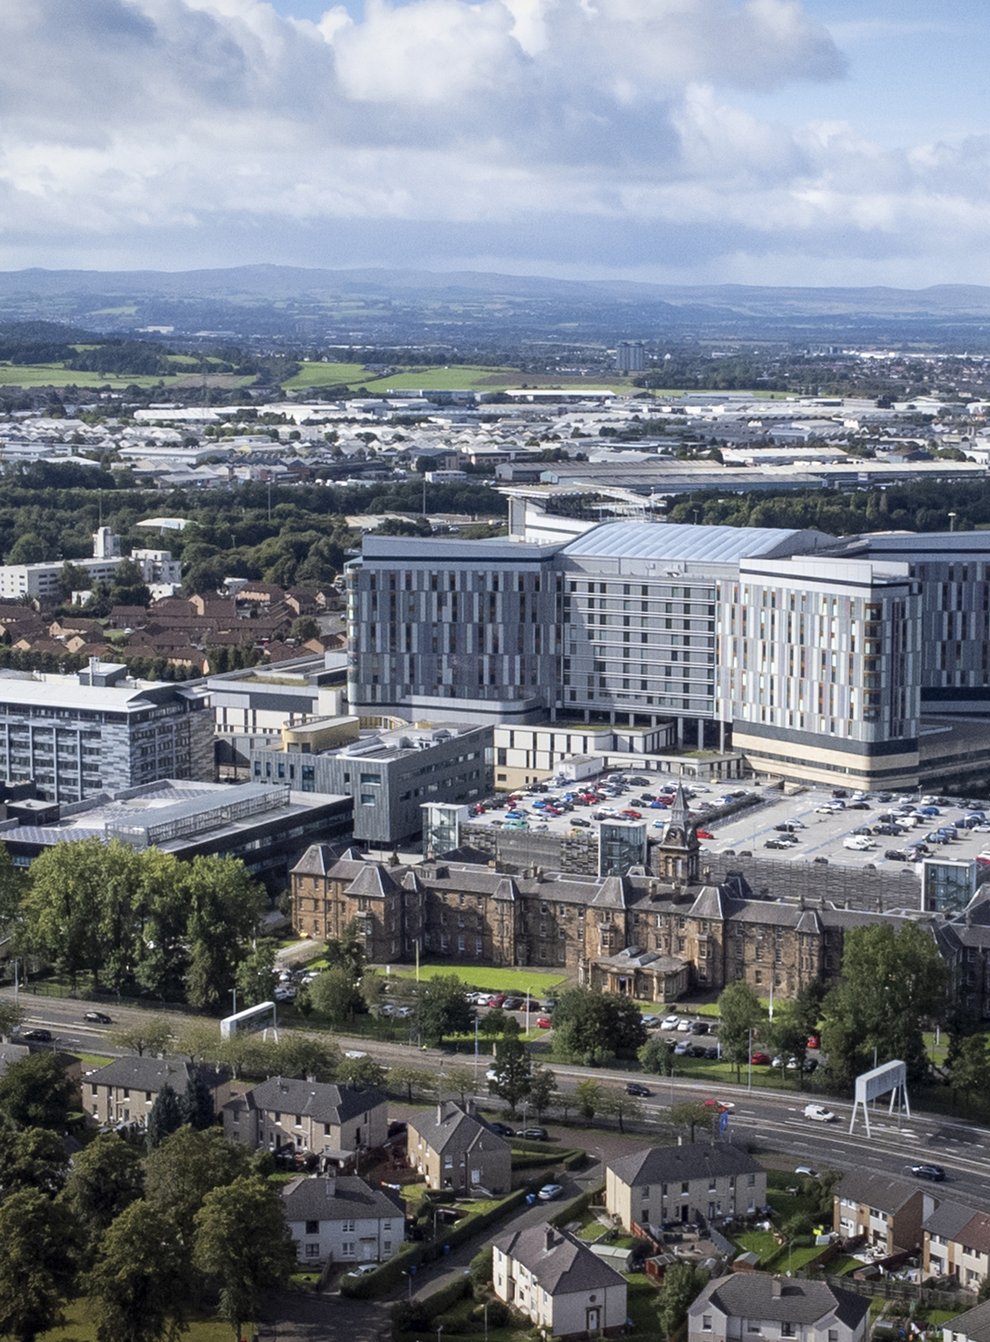 The inquiry is investigating the Queen Elizabeth University Hospital (Jane Barlow/PA)